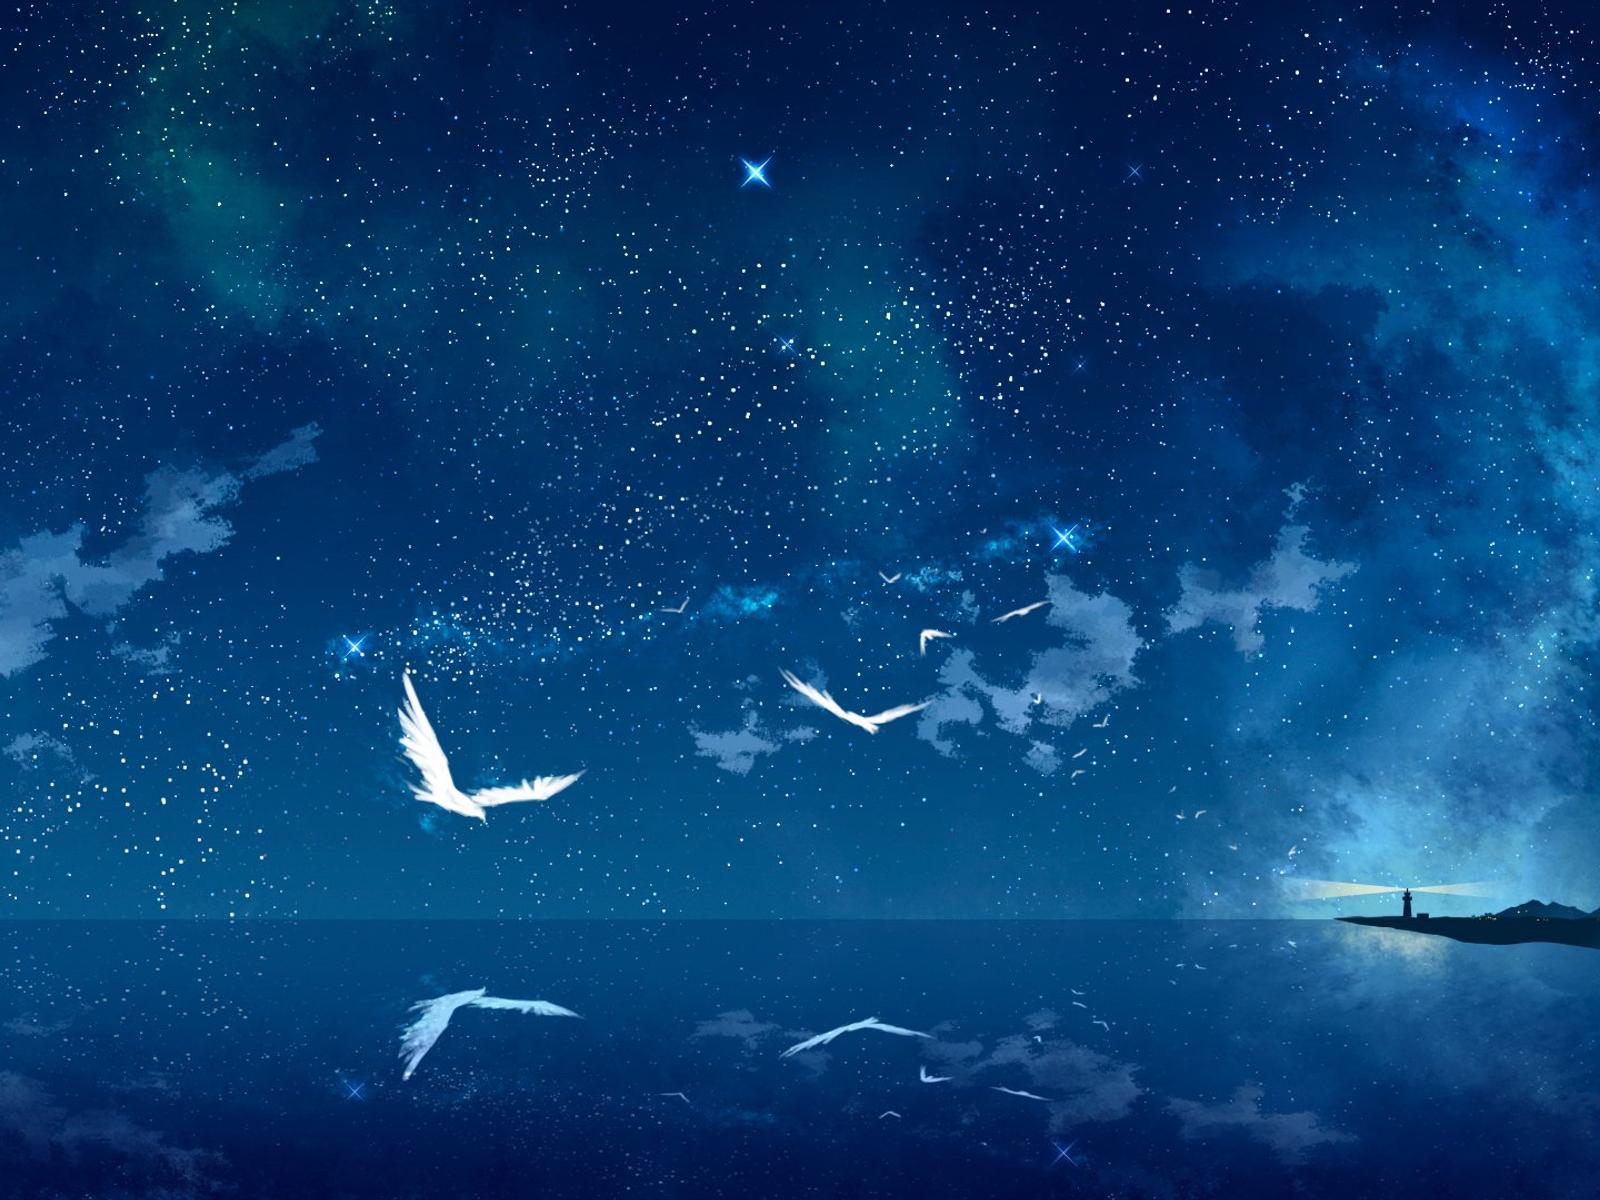 White birds flying over the blue ocean water - Magic mirror